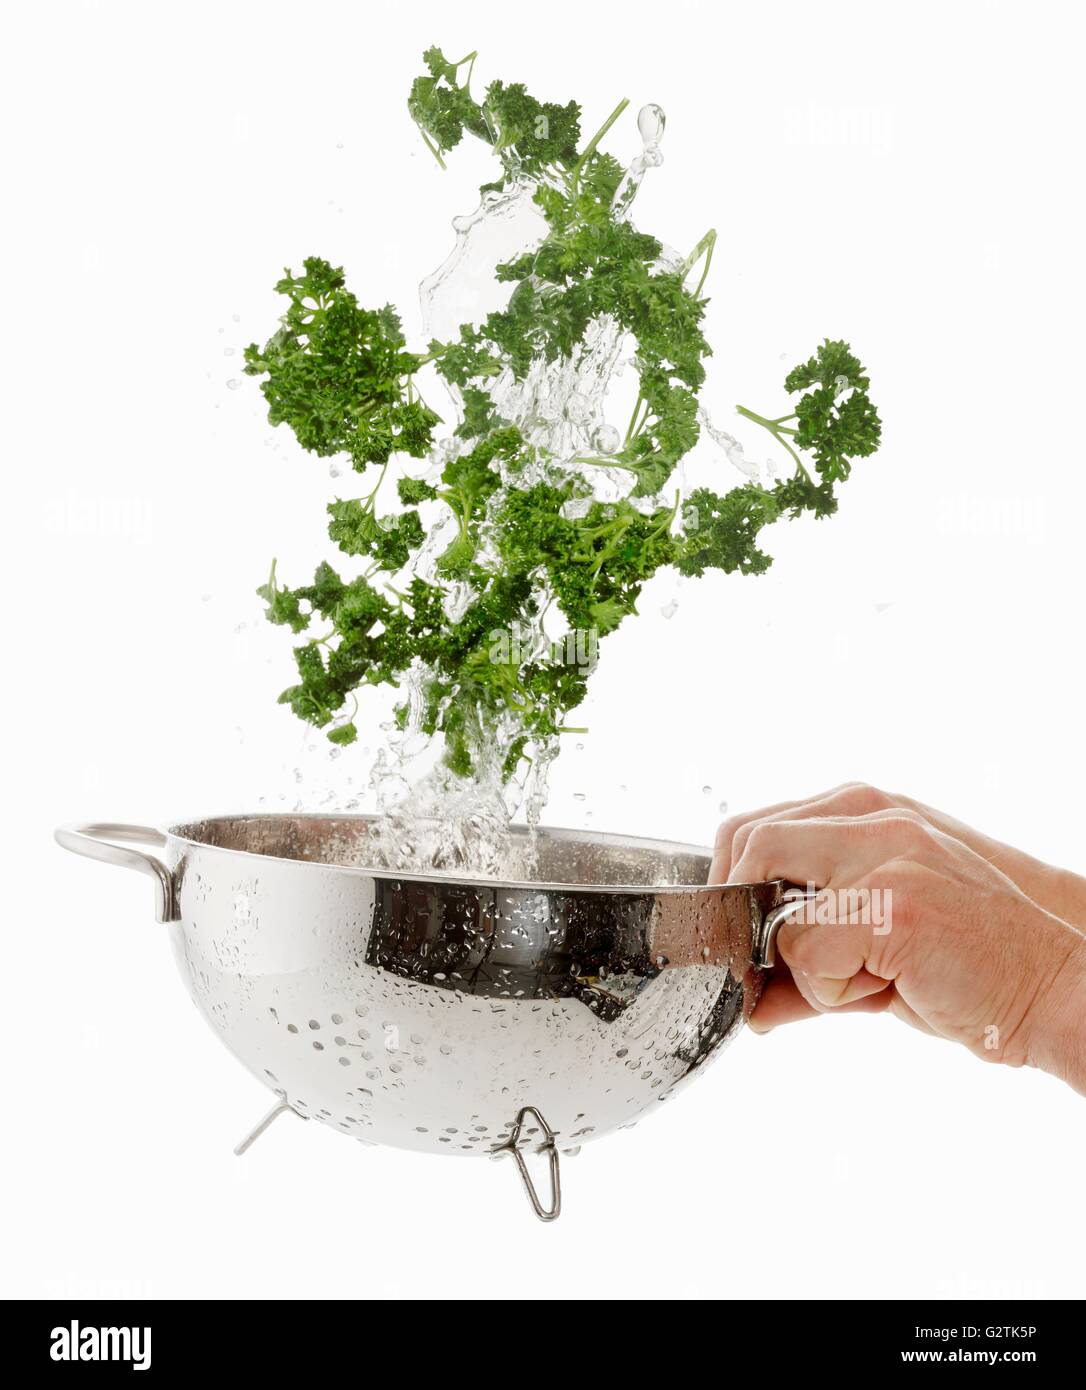 Parsley being washed Stock Photo